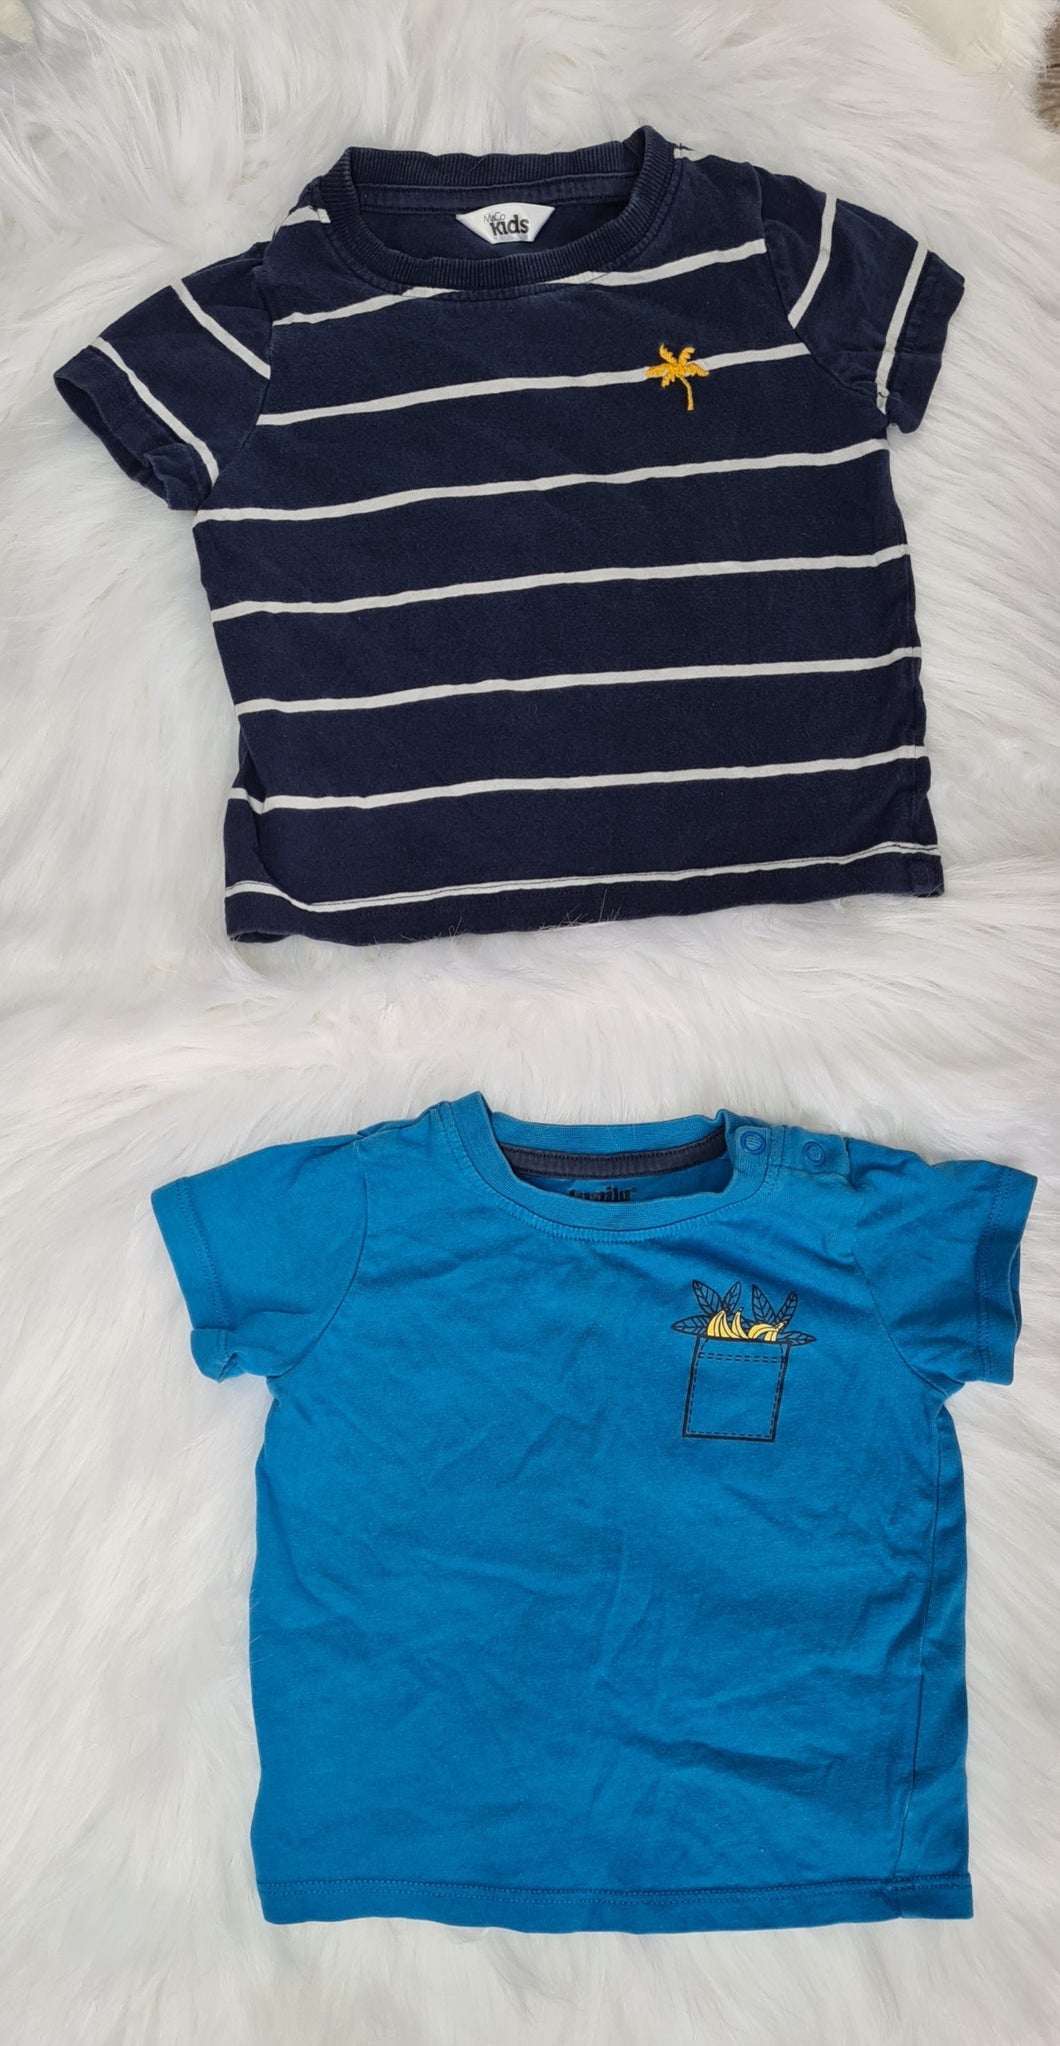 Boys 9-12 Months - Two Set of T-Shirts - Blue and Navy & White